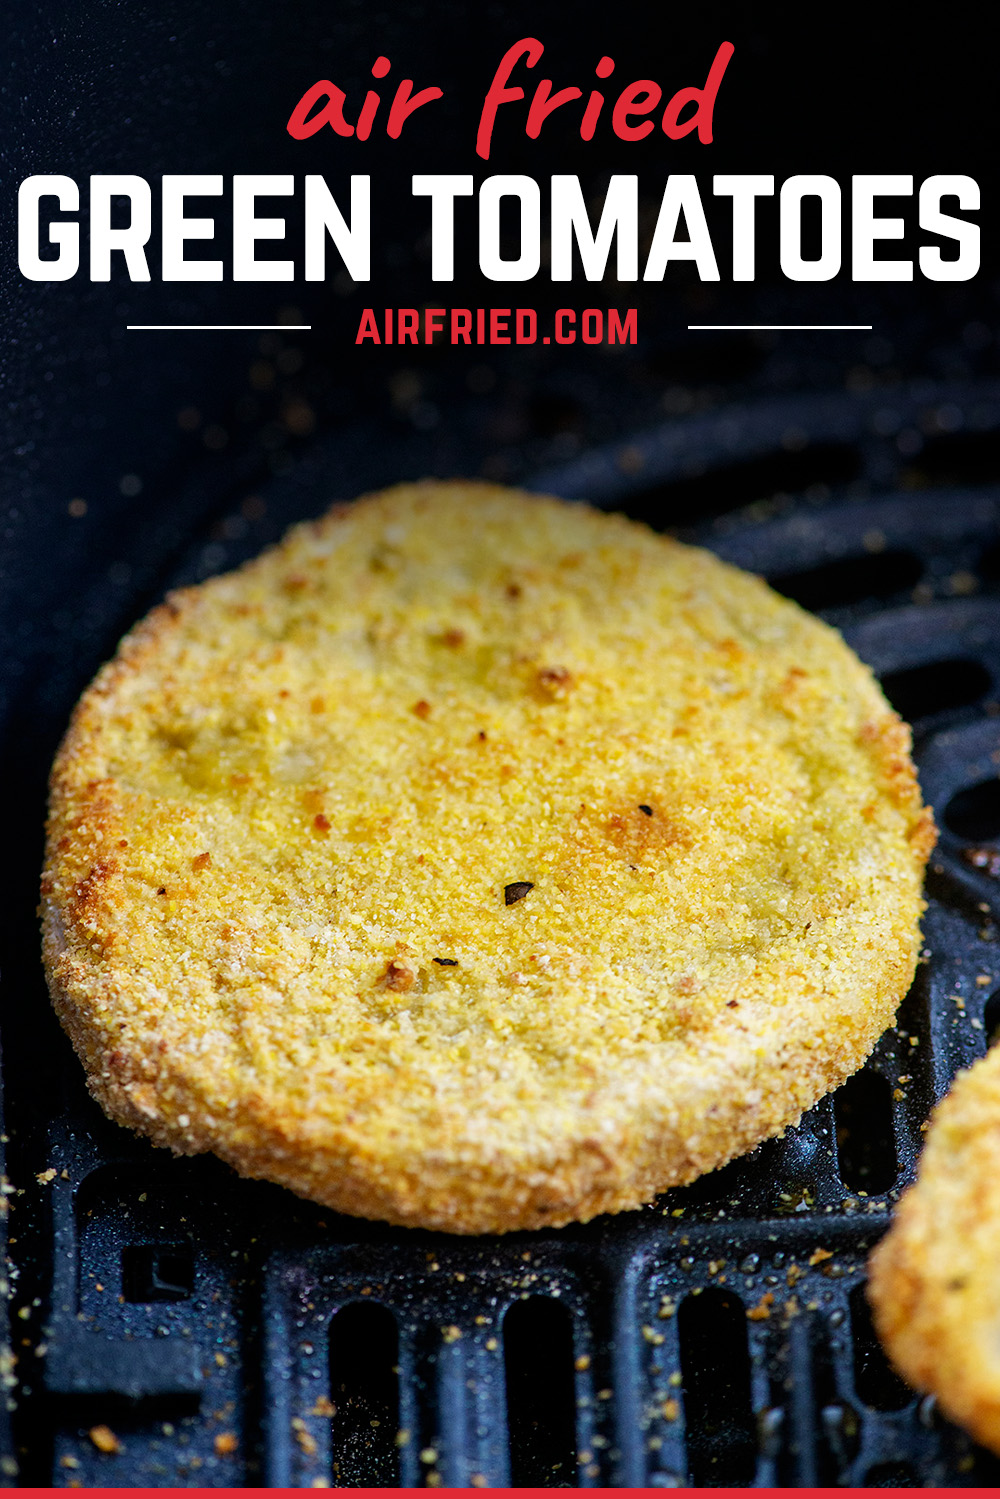 These fried green tomatoes are perfectly crispy out of the air fryer!